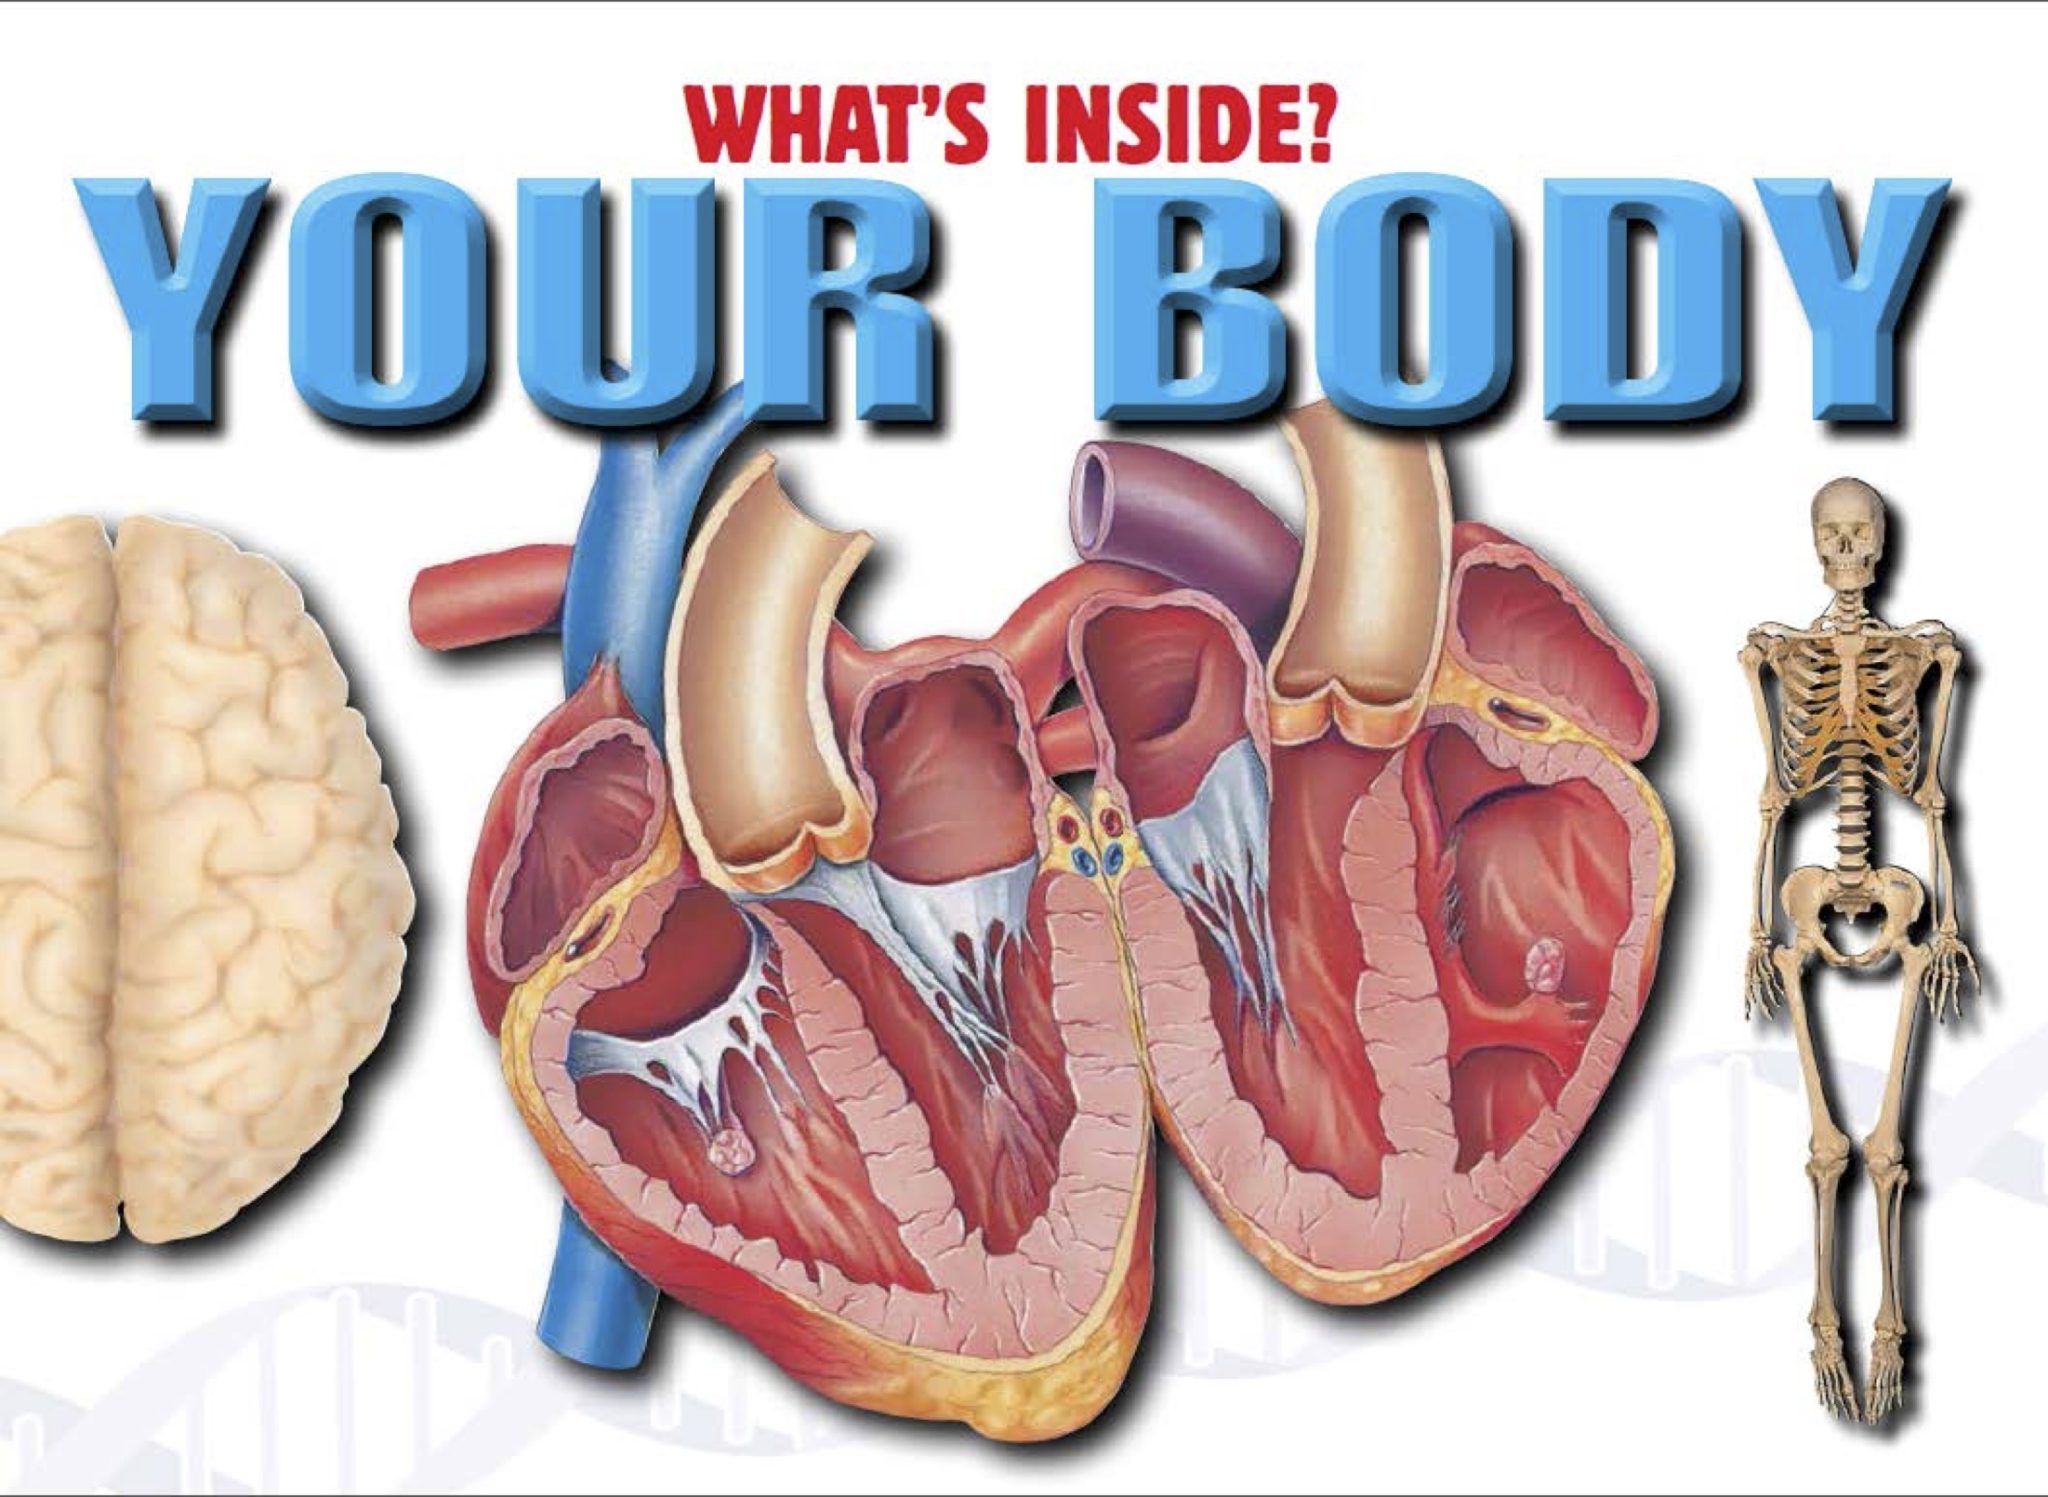 What’s Inside? Your Body